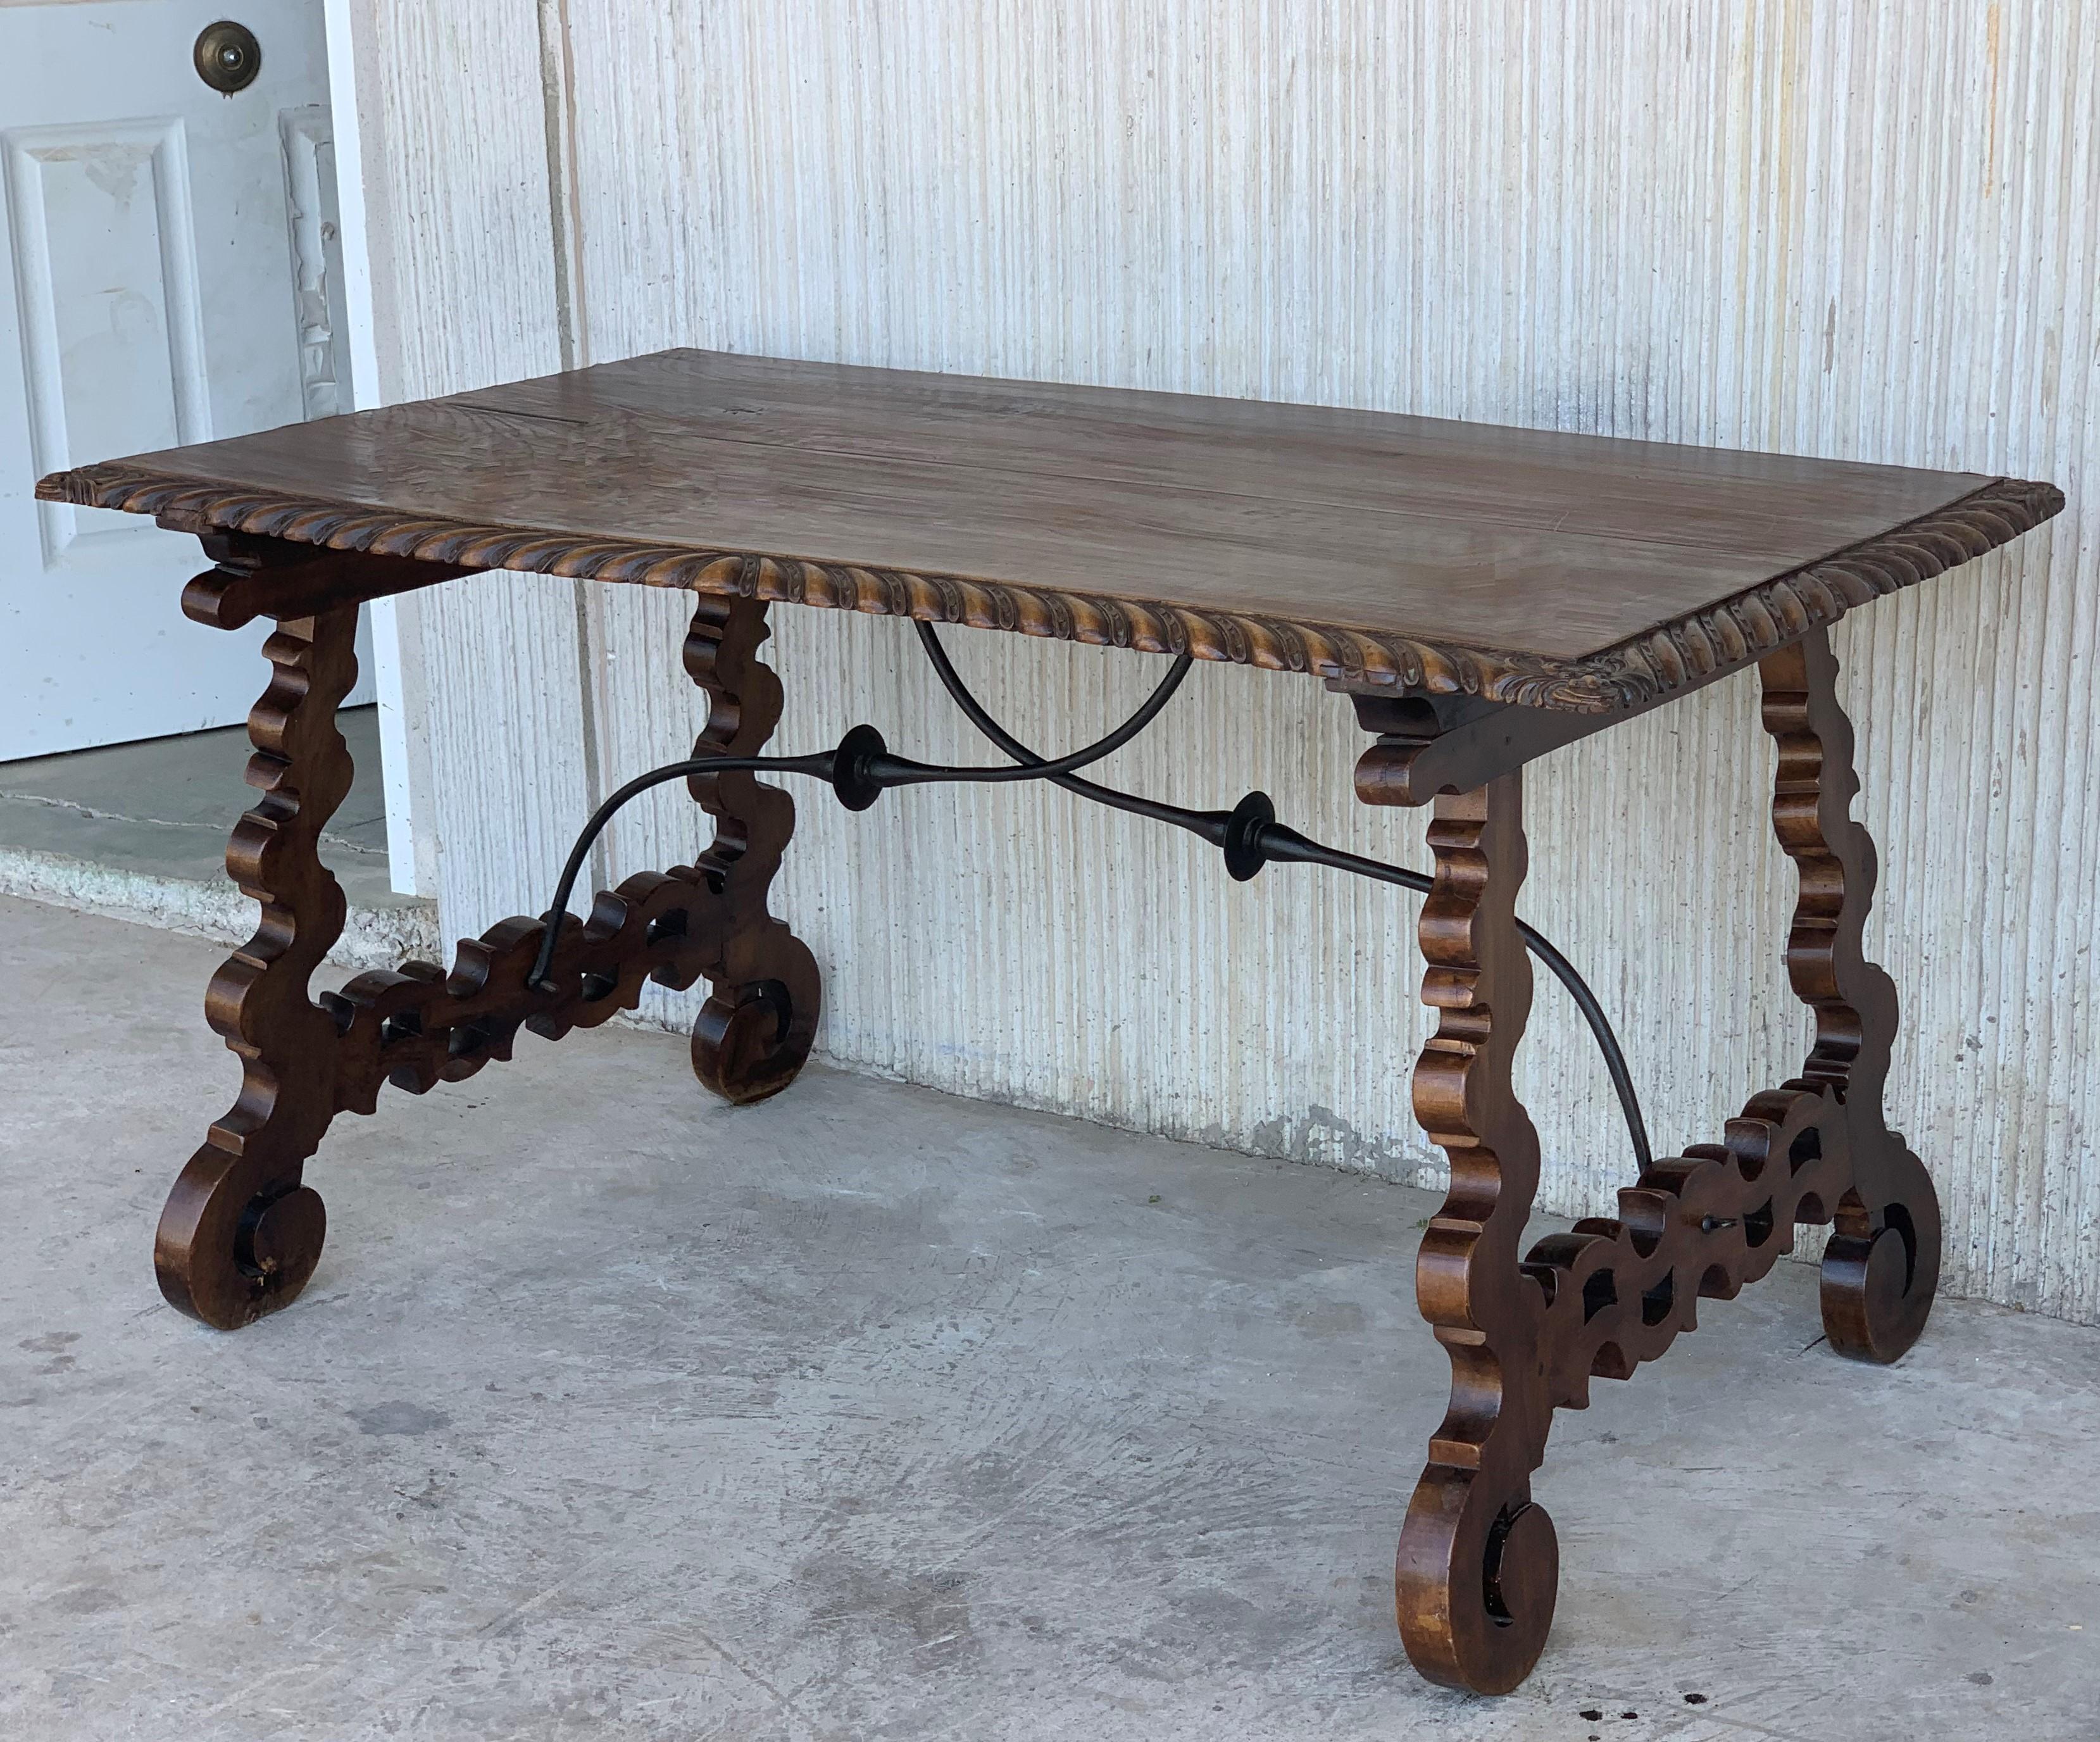 Baroque 18th Century Refectory Spanish Table with Lyre Legs, Carved Edges & Iron Stretch